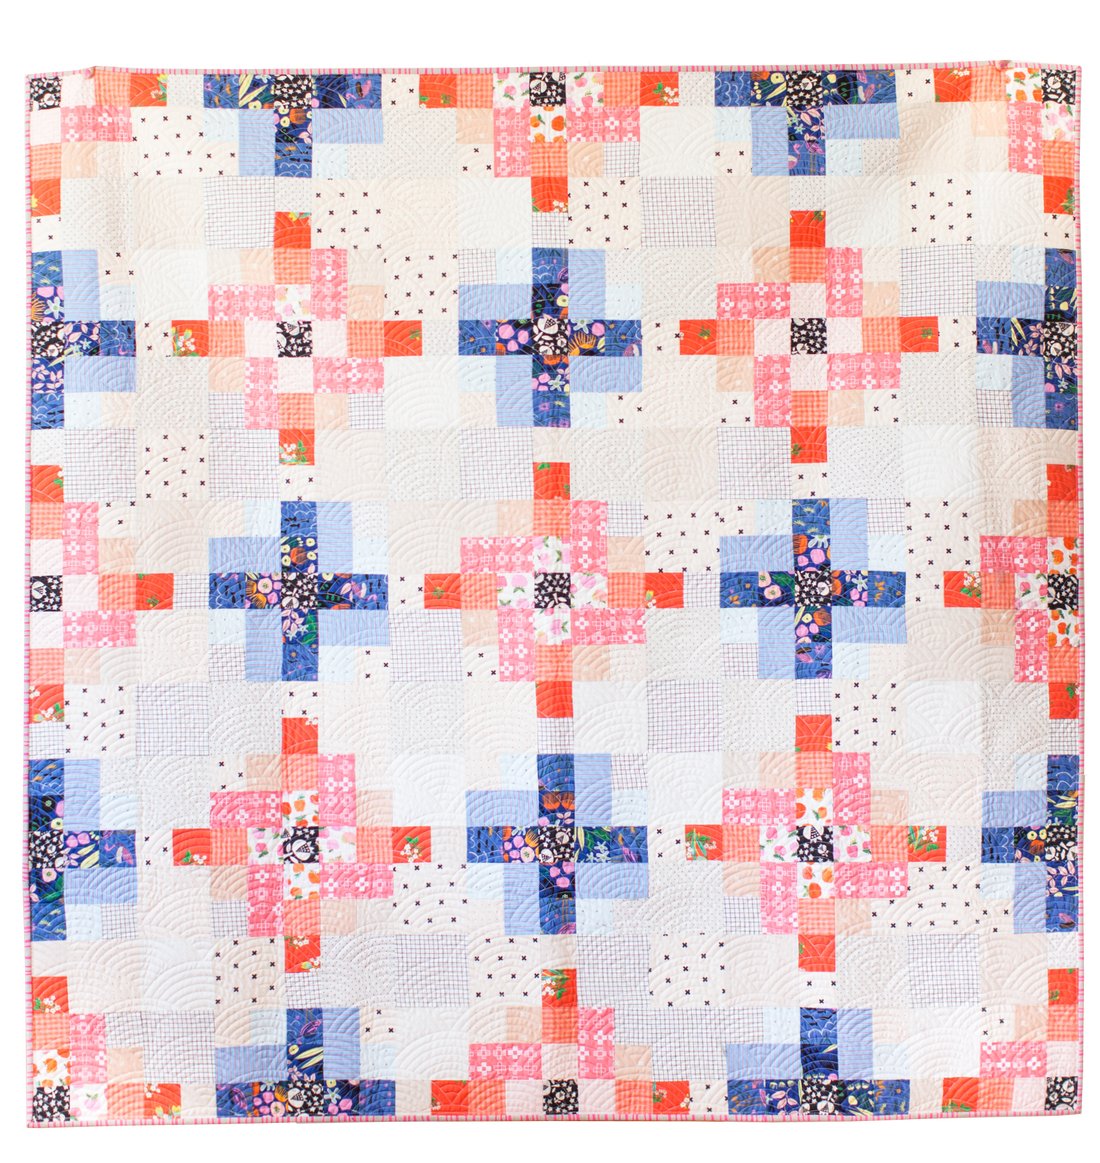 Granny Cabin Quilt - the Scrappy One